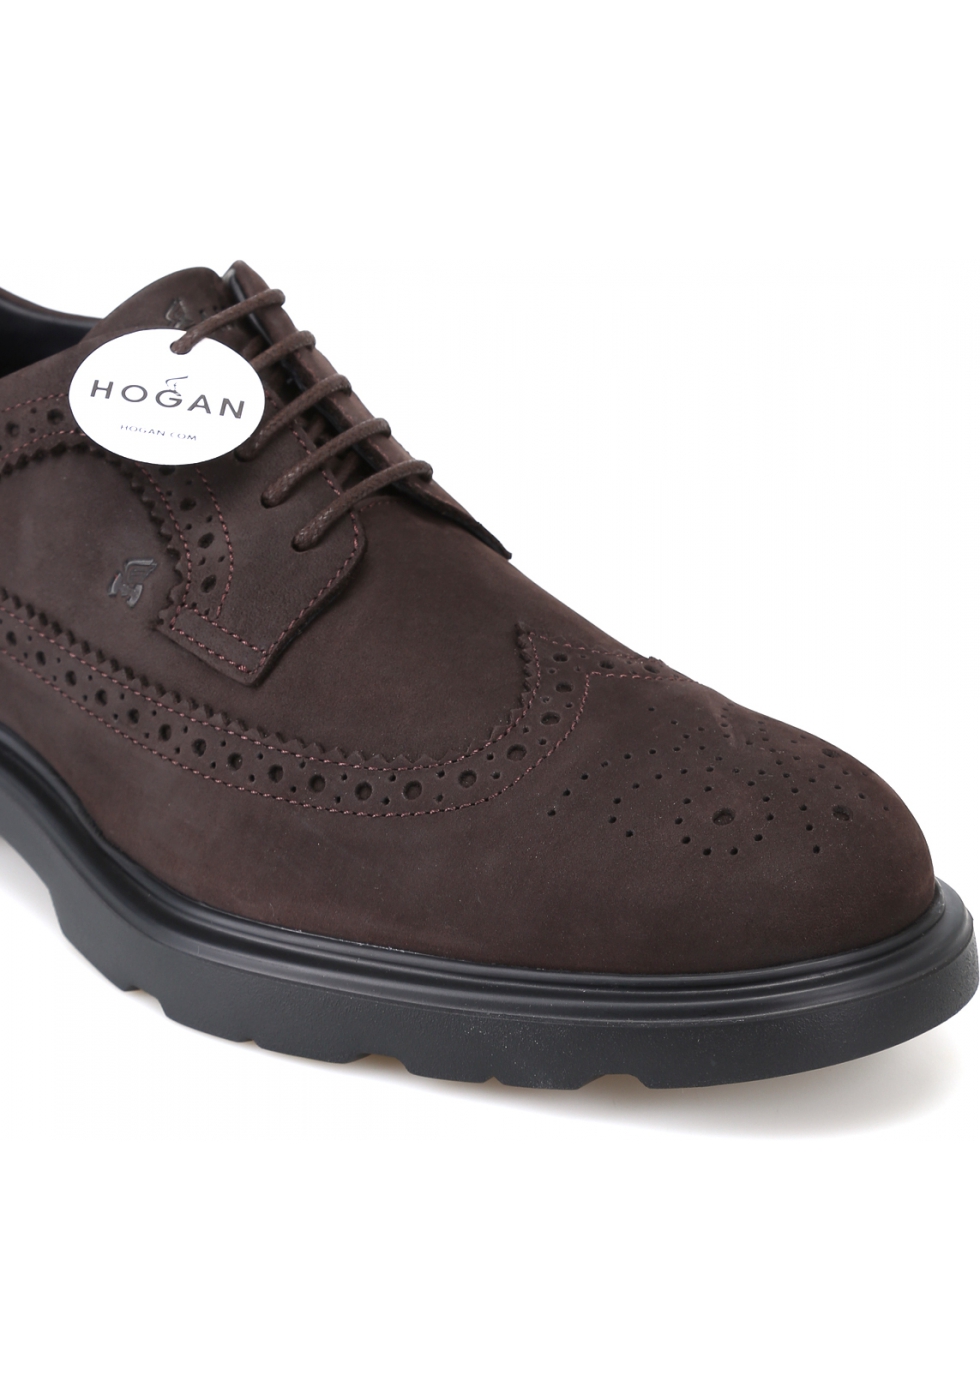 Hogan Men's fashion round toe lace-ups shoes in brown nubuck leather ...